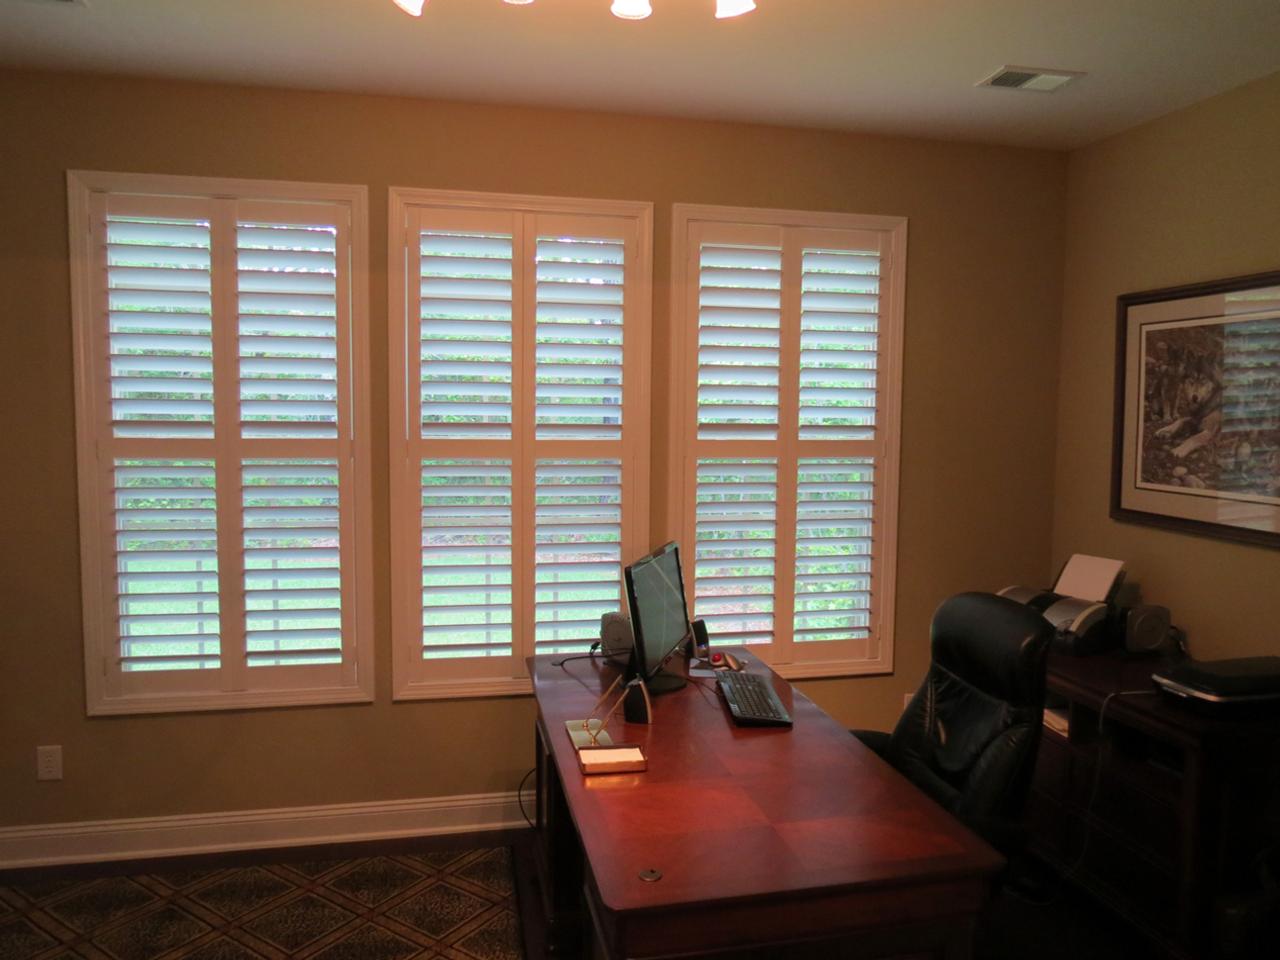 Home office with interior shutters